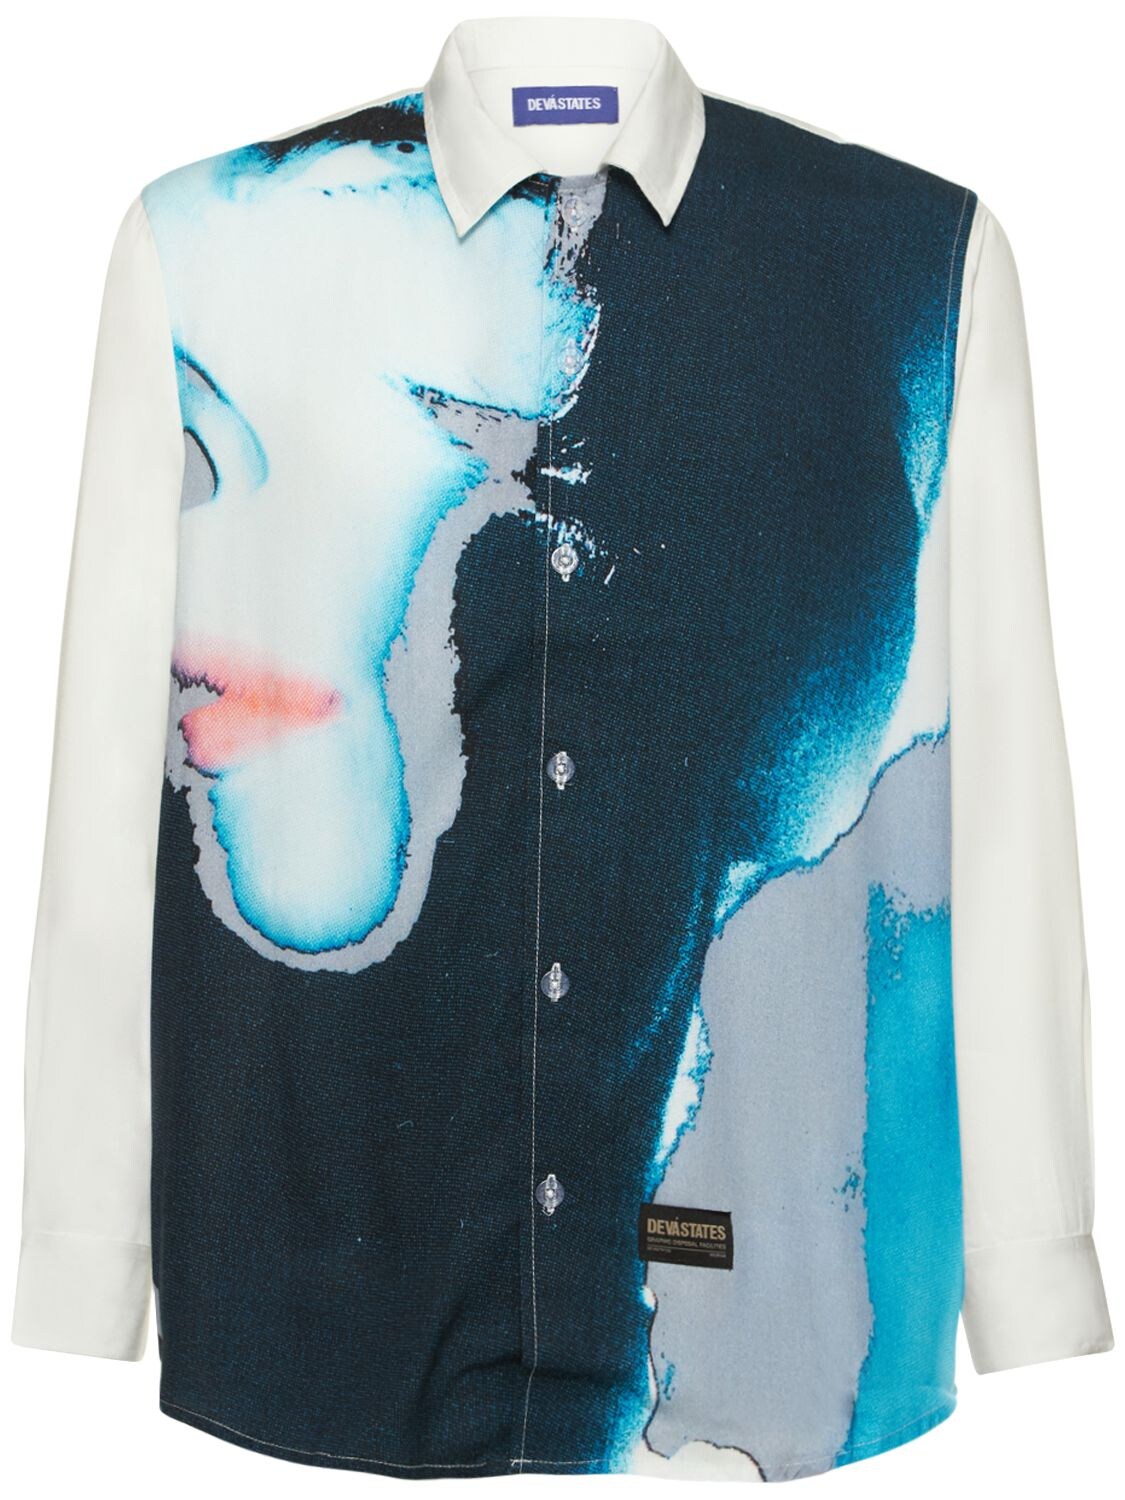 DEVA STATES OBSCURE PRINTED RAYON SHIRT